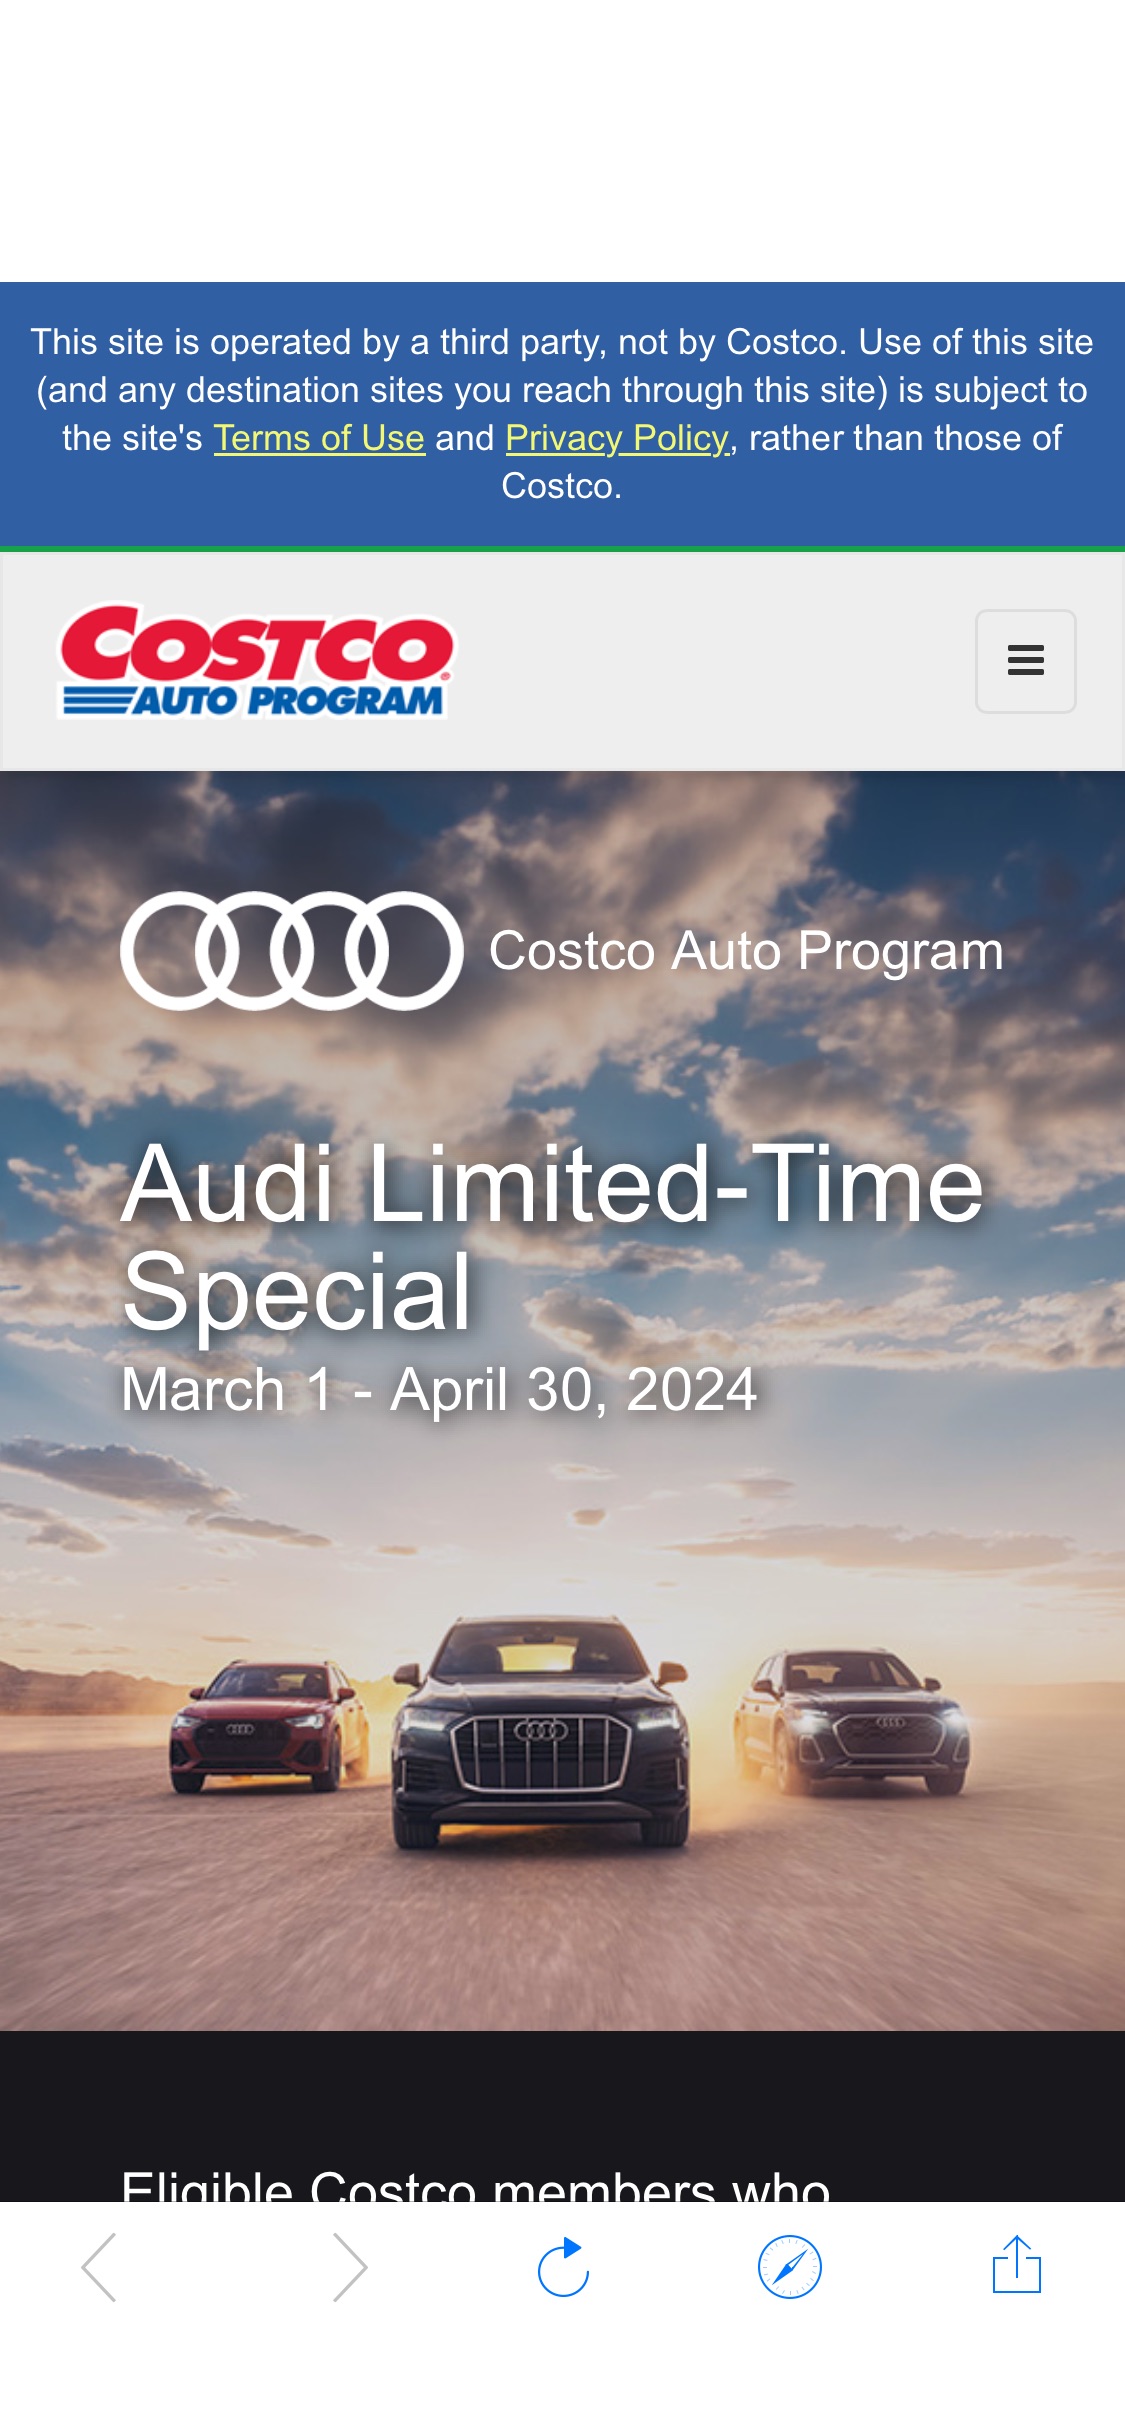 Save an extra $1500-3,000 on certain Audi models (valid through 04/30/24), includes E-Tron models